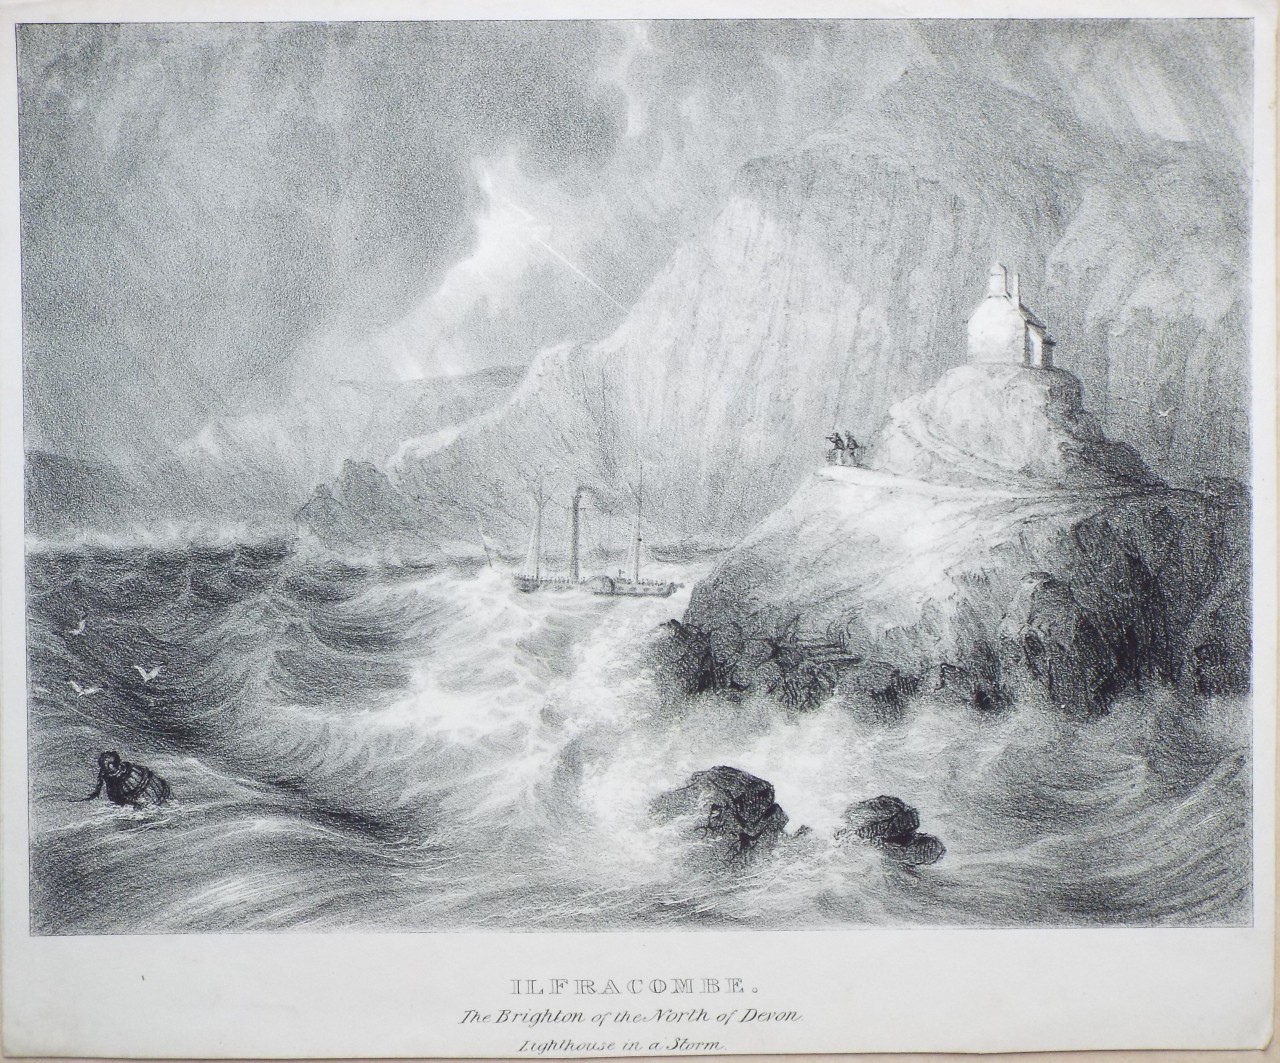 Lithograph - Ilfracombe. The Brighton of the North of Devon. Lighthouse in a Storm.